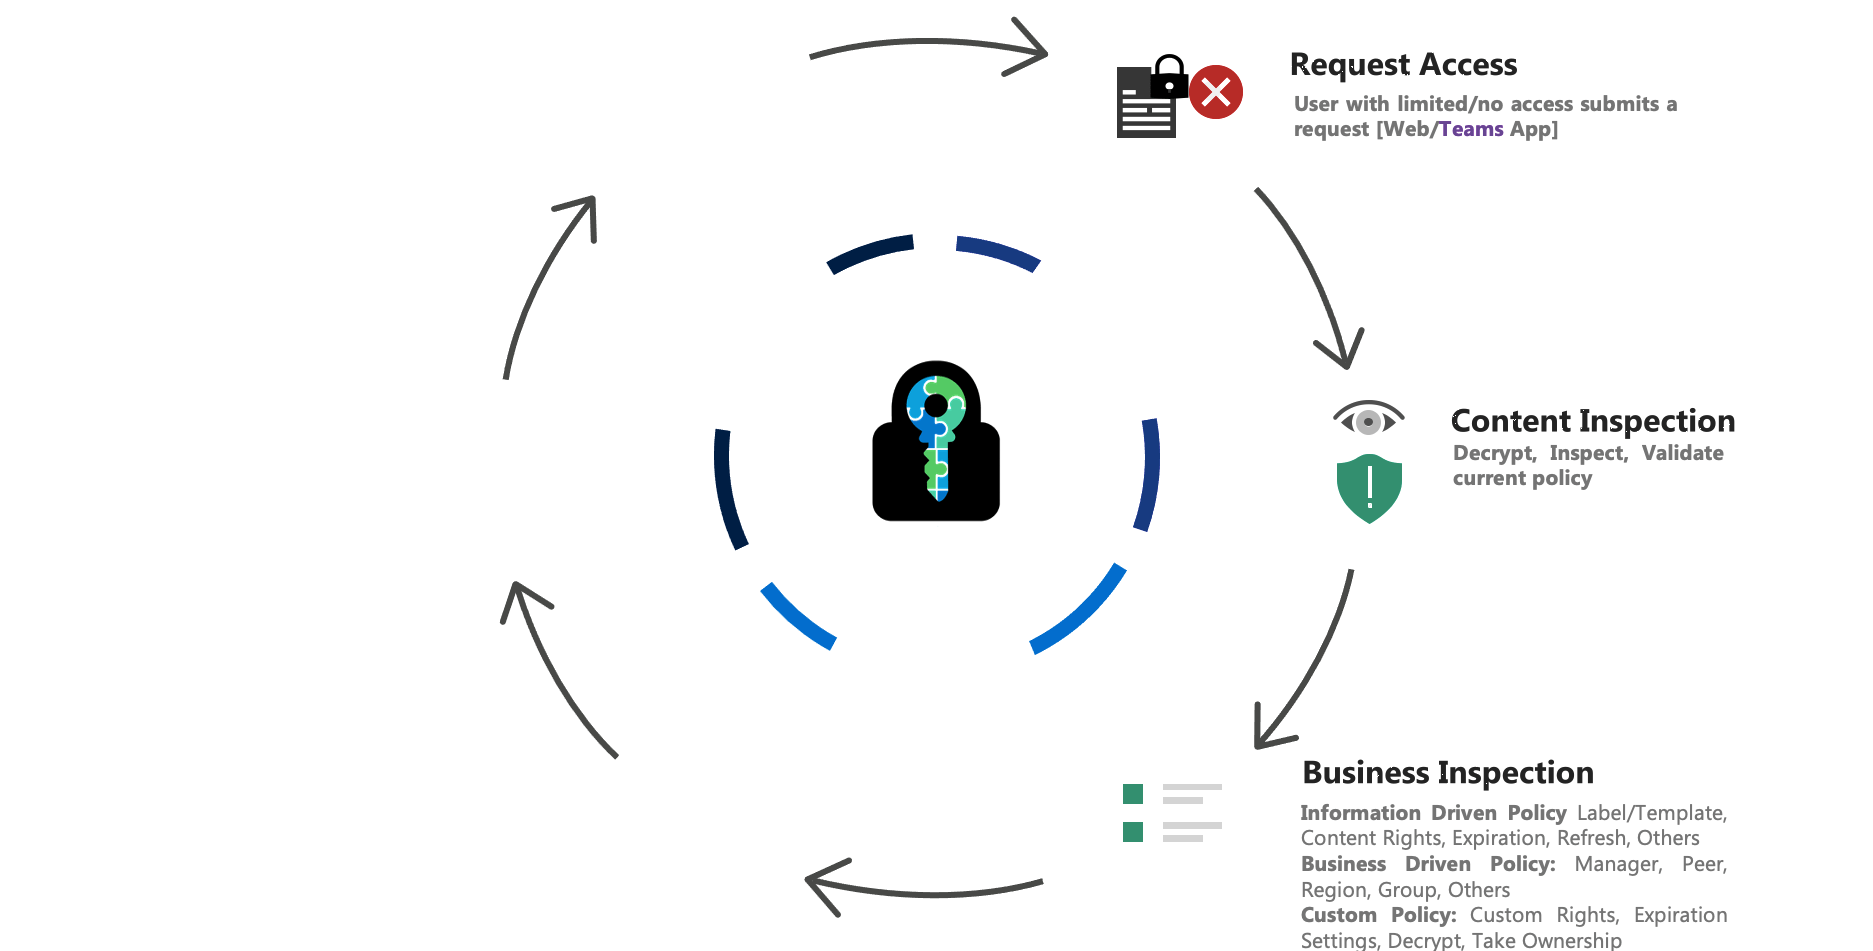 E-cryptor Lifecycle Business Inspection